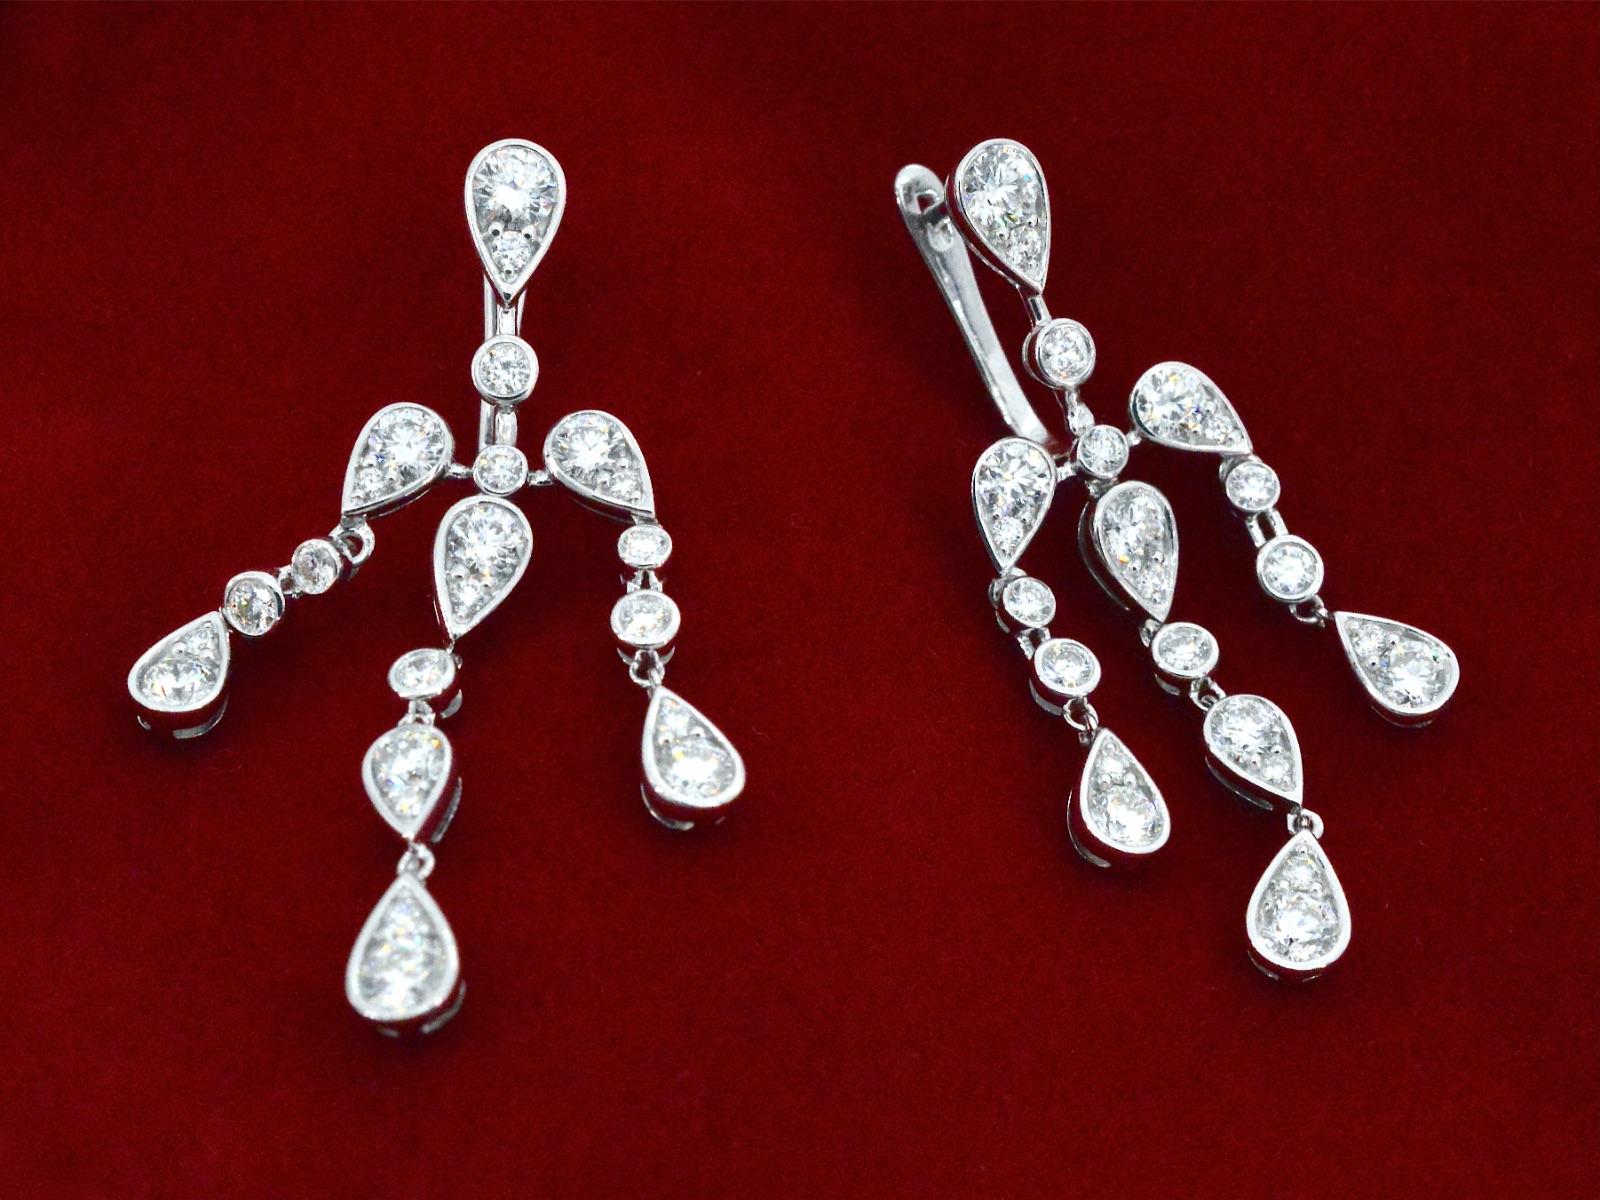 These 18K white gold earrings are a unique and special design featuring diamonds. The 18K white gold is a premium quality metal that is highly lustrous and durable. The diamonds used in these earrings are carefully selected for their exceptional